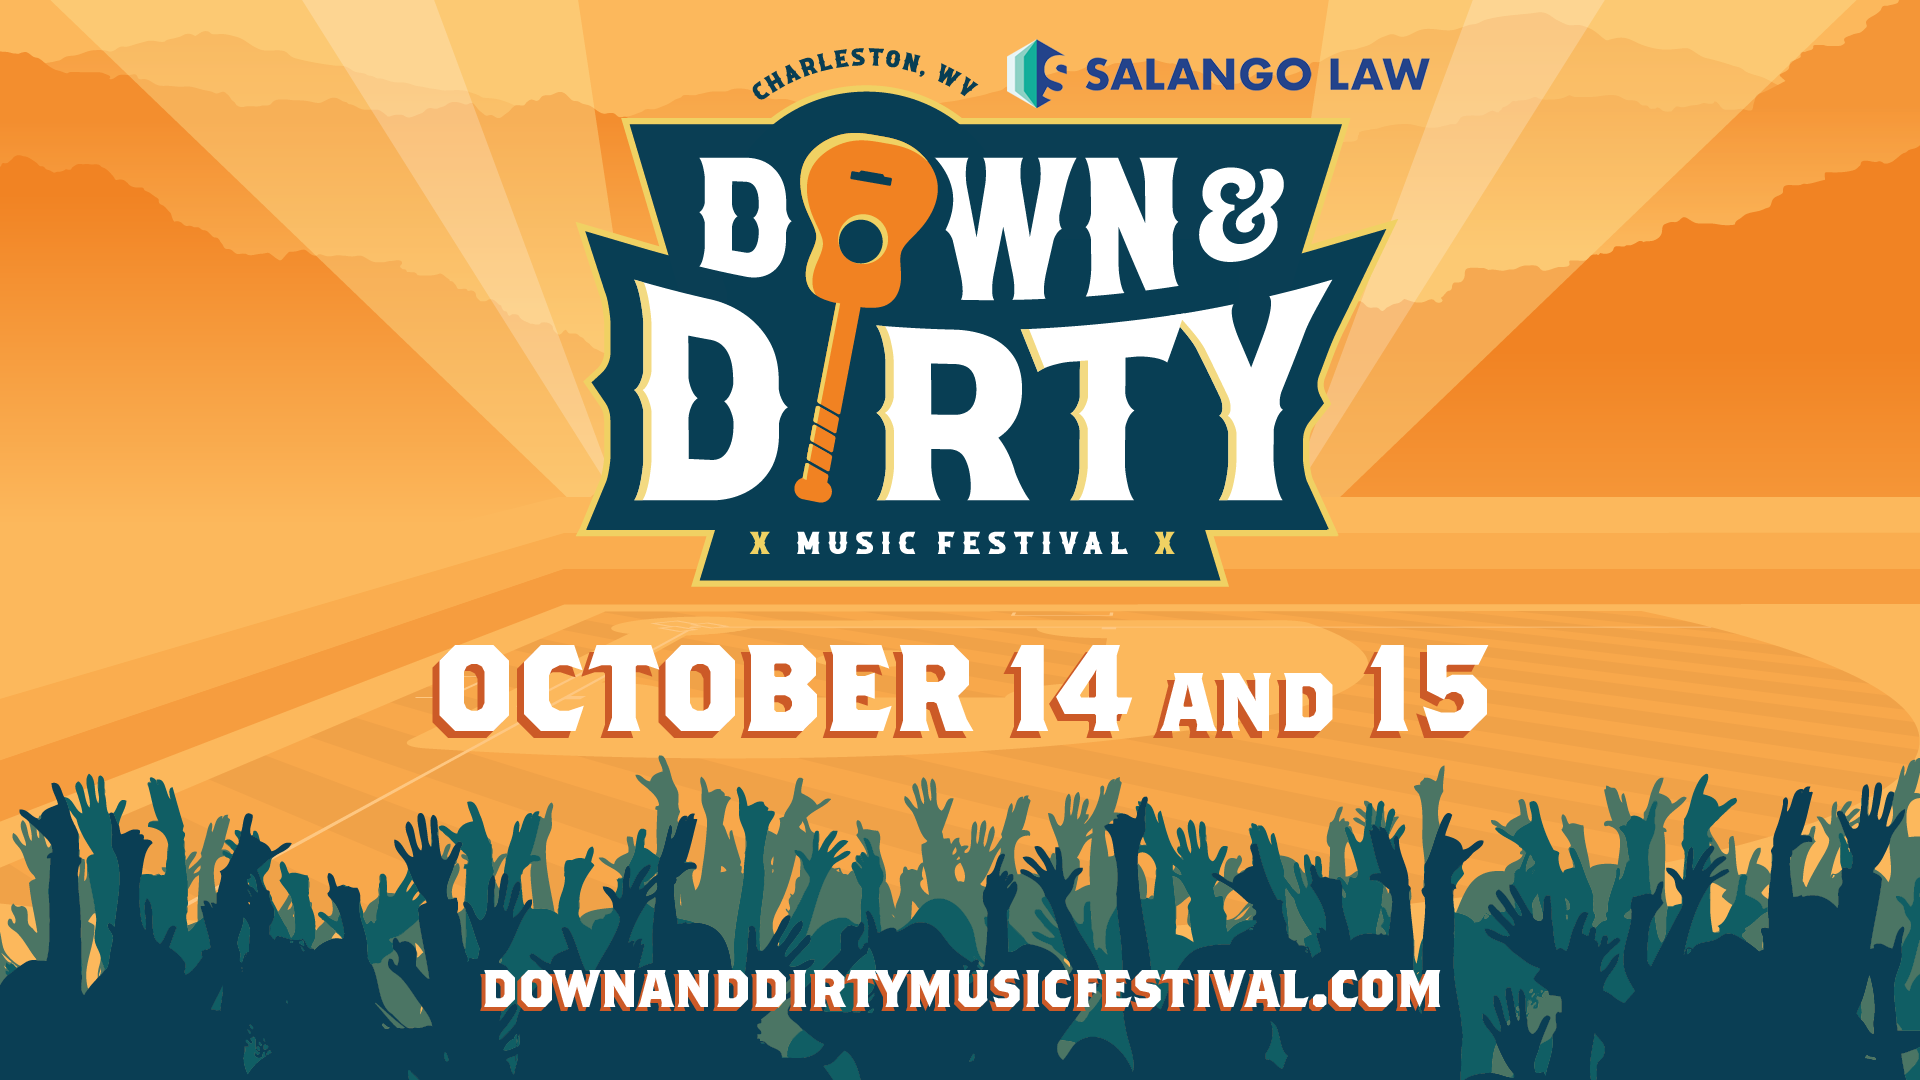 Inaugural Salango Law Down and Dirty Music Festival to be Held at Gomart Ballpark October 14th and 15th